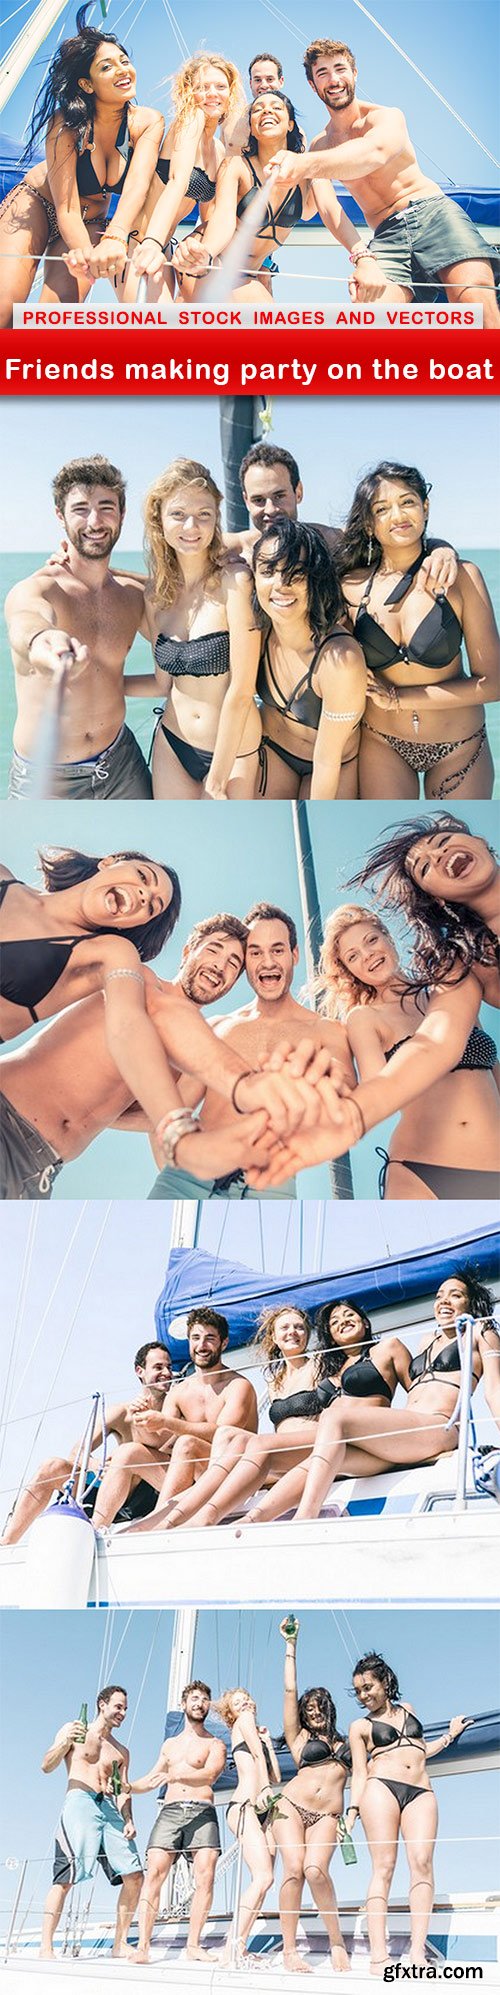 Friends making party on the boat - 5 UHQ JPEG